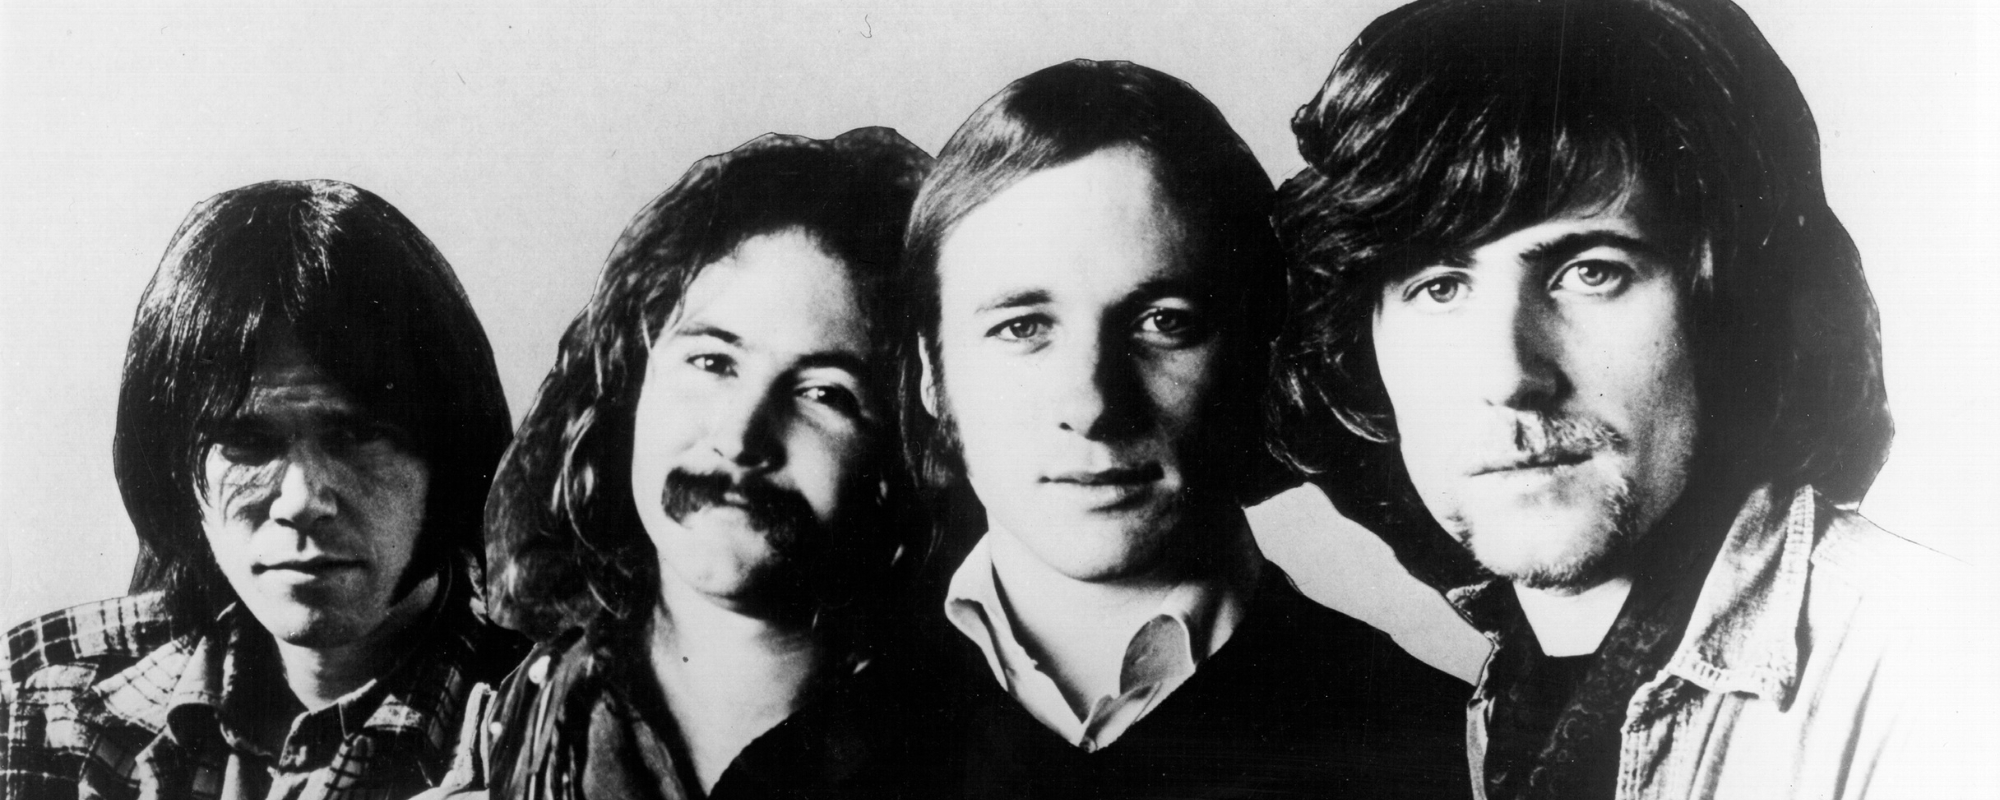 The Beatles Icon That Rejected Crosby, Stills, & Nash When They Were Looking for a Record Deal – American Songwriter